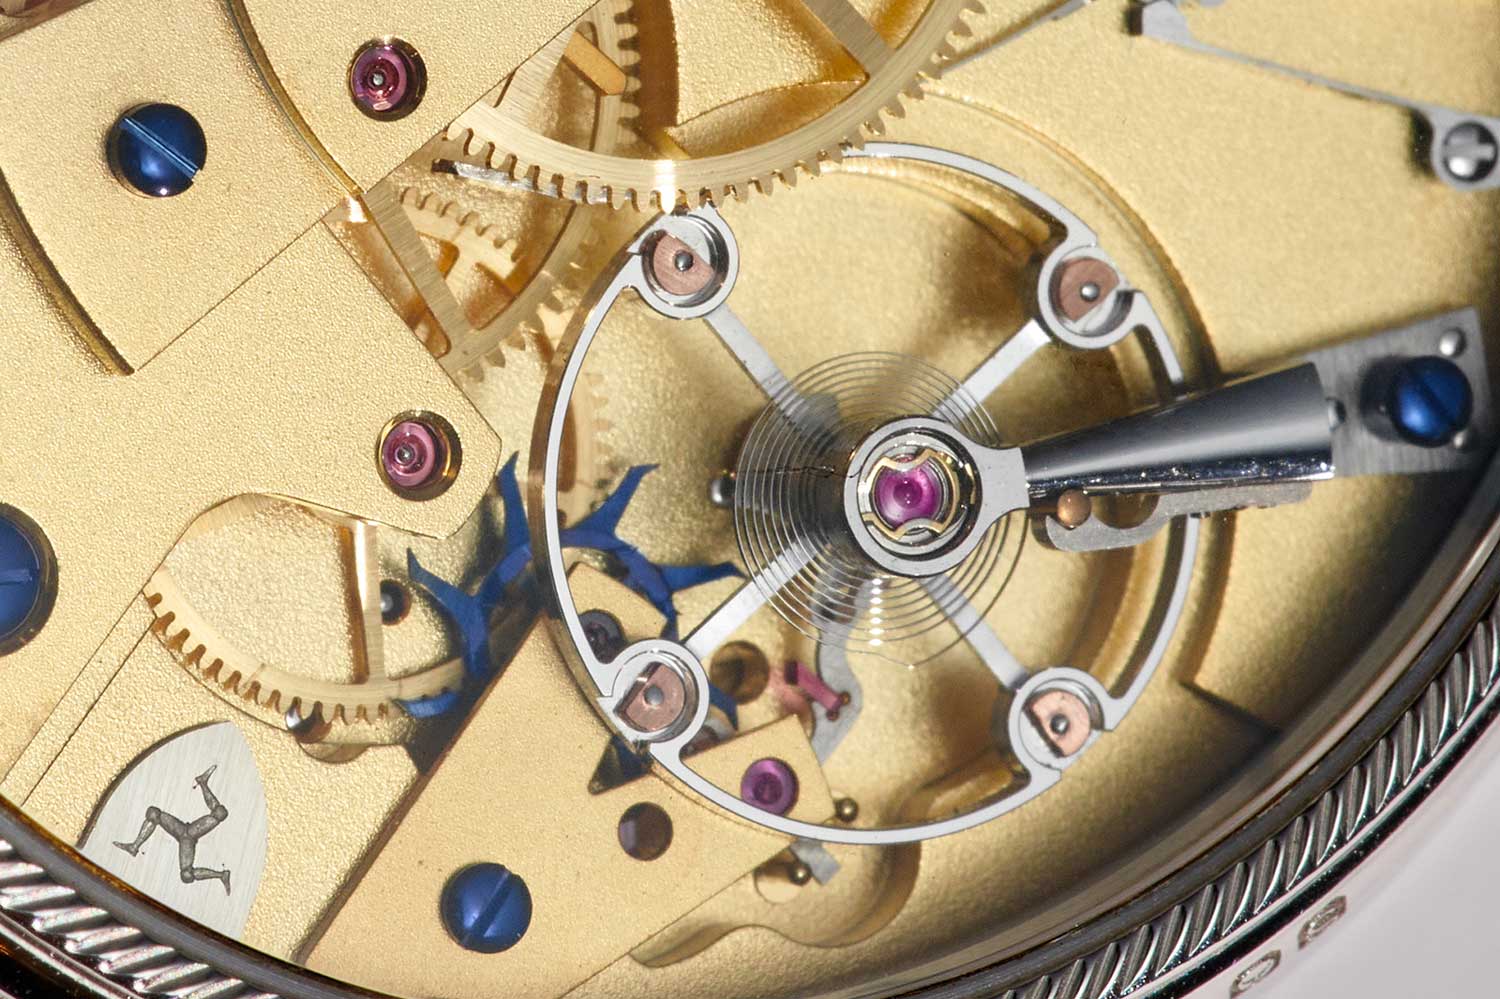 The movement is equipped with a single-wheel Co-Axial escapement that was refined by Roger Smith to enhance concentricity while reducing inertia